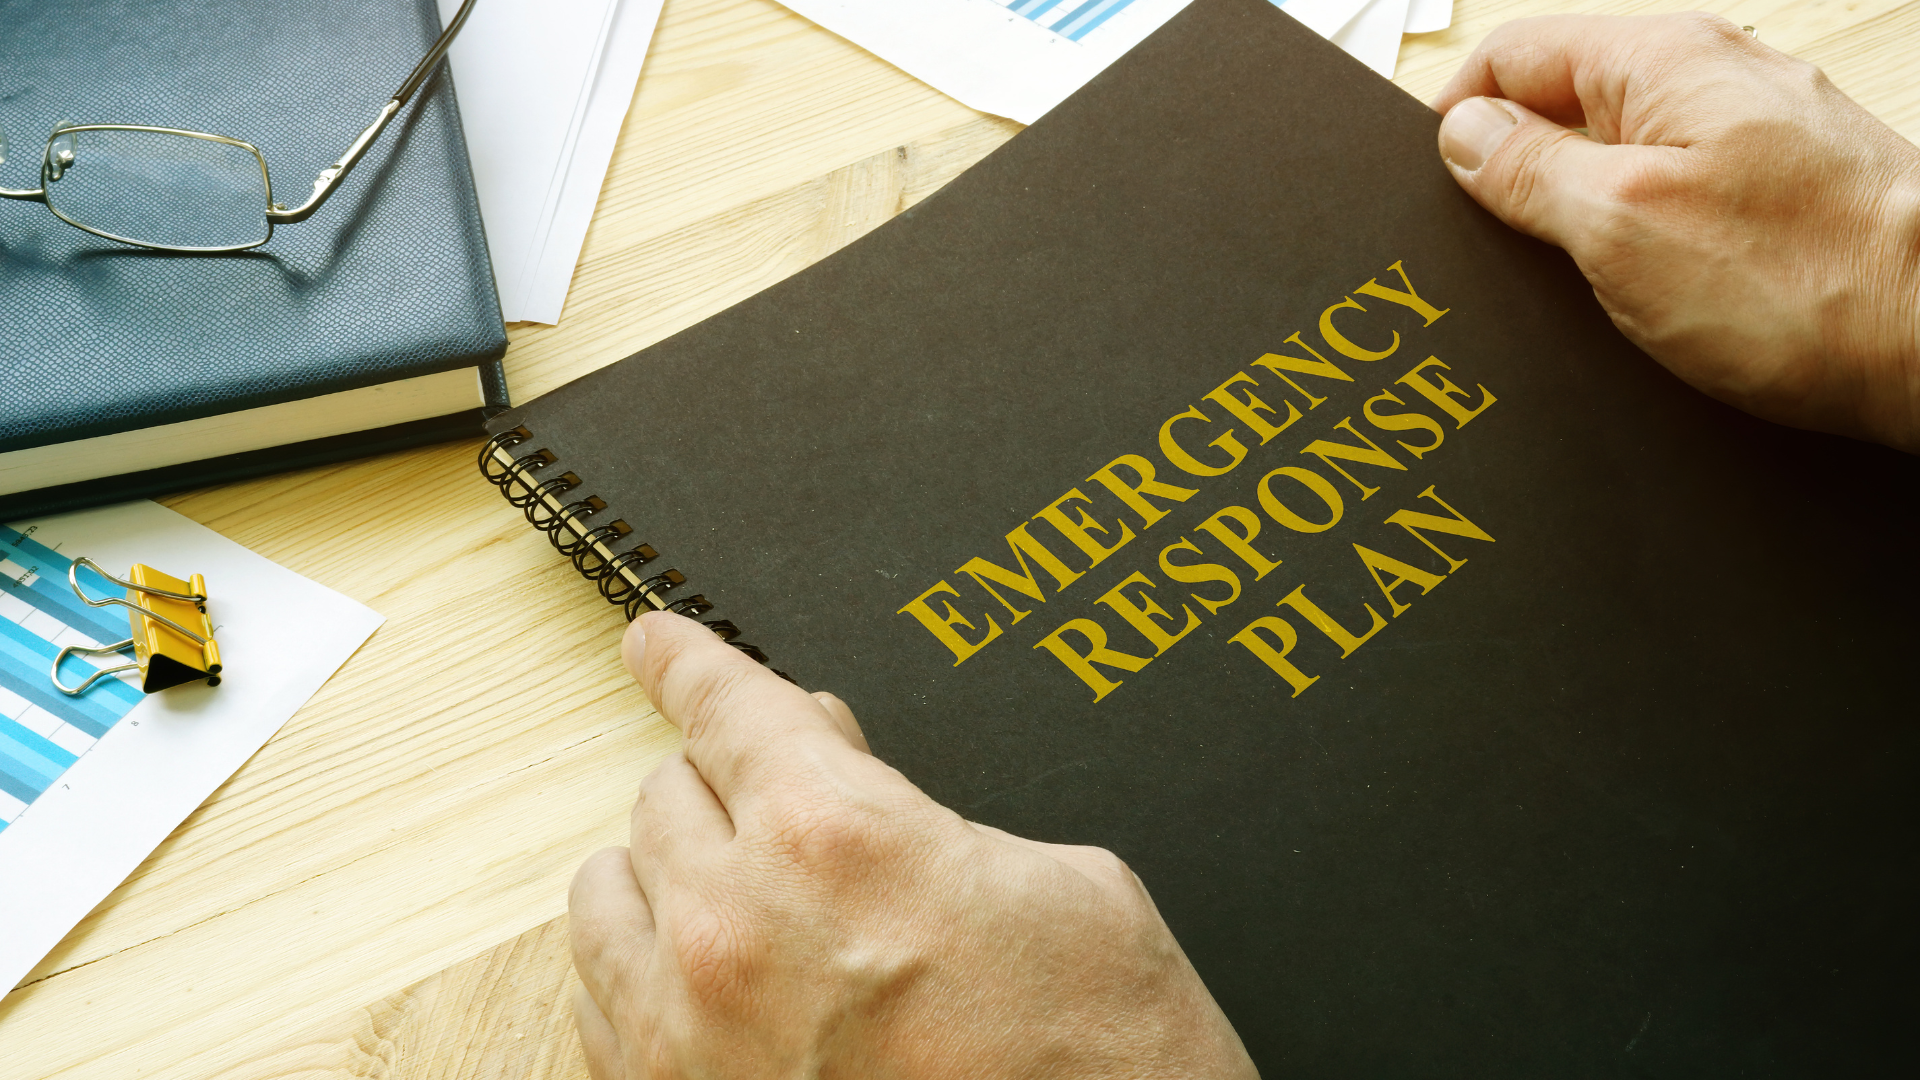 Why are Emergency Response Assistance Plans (ERAPs) so Important?